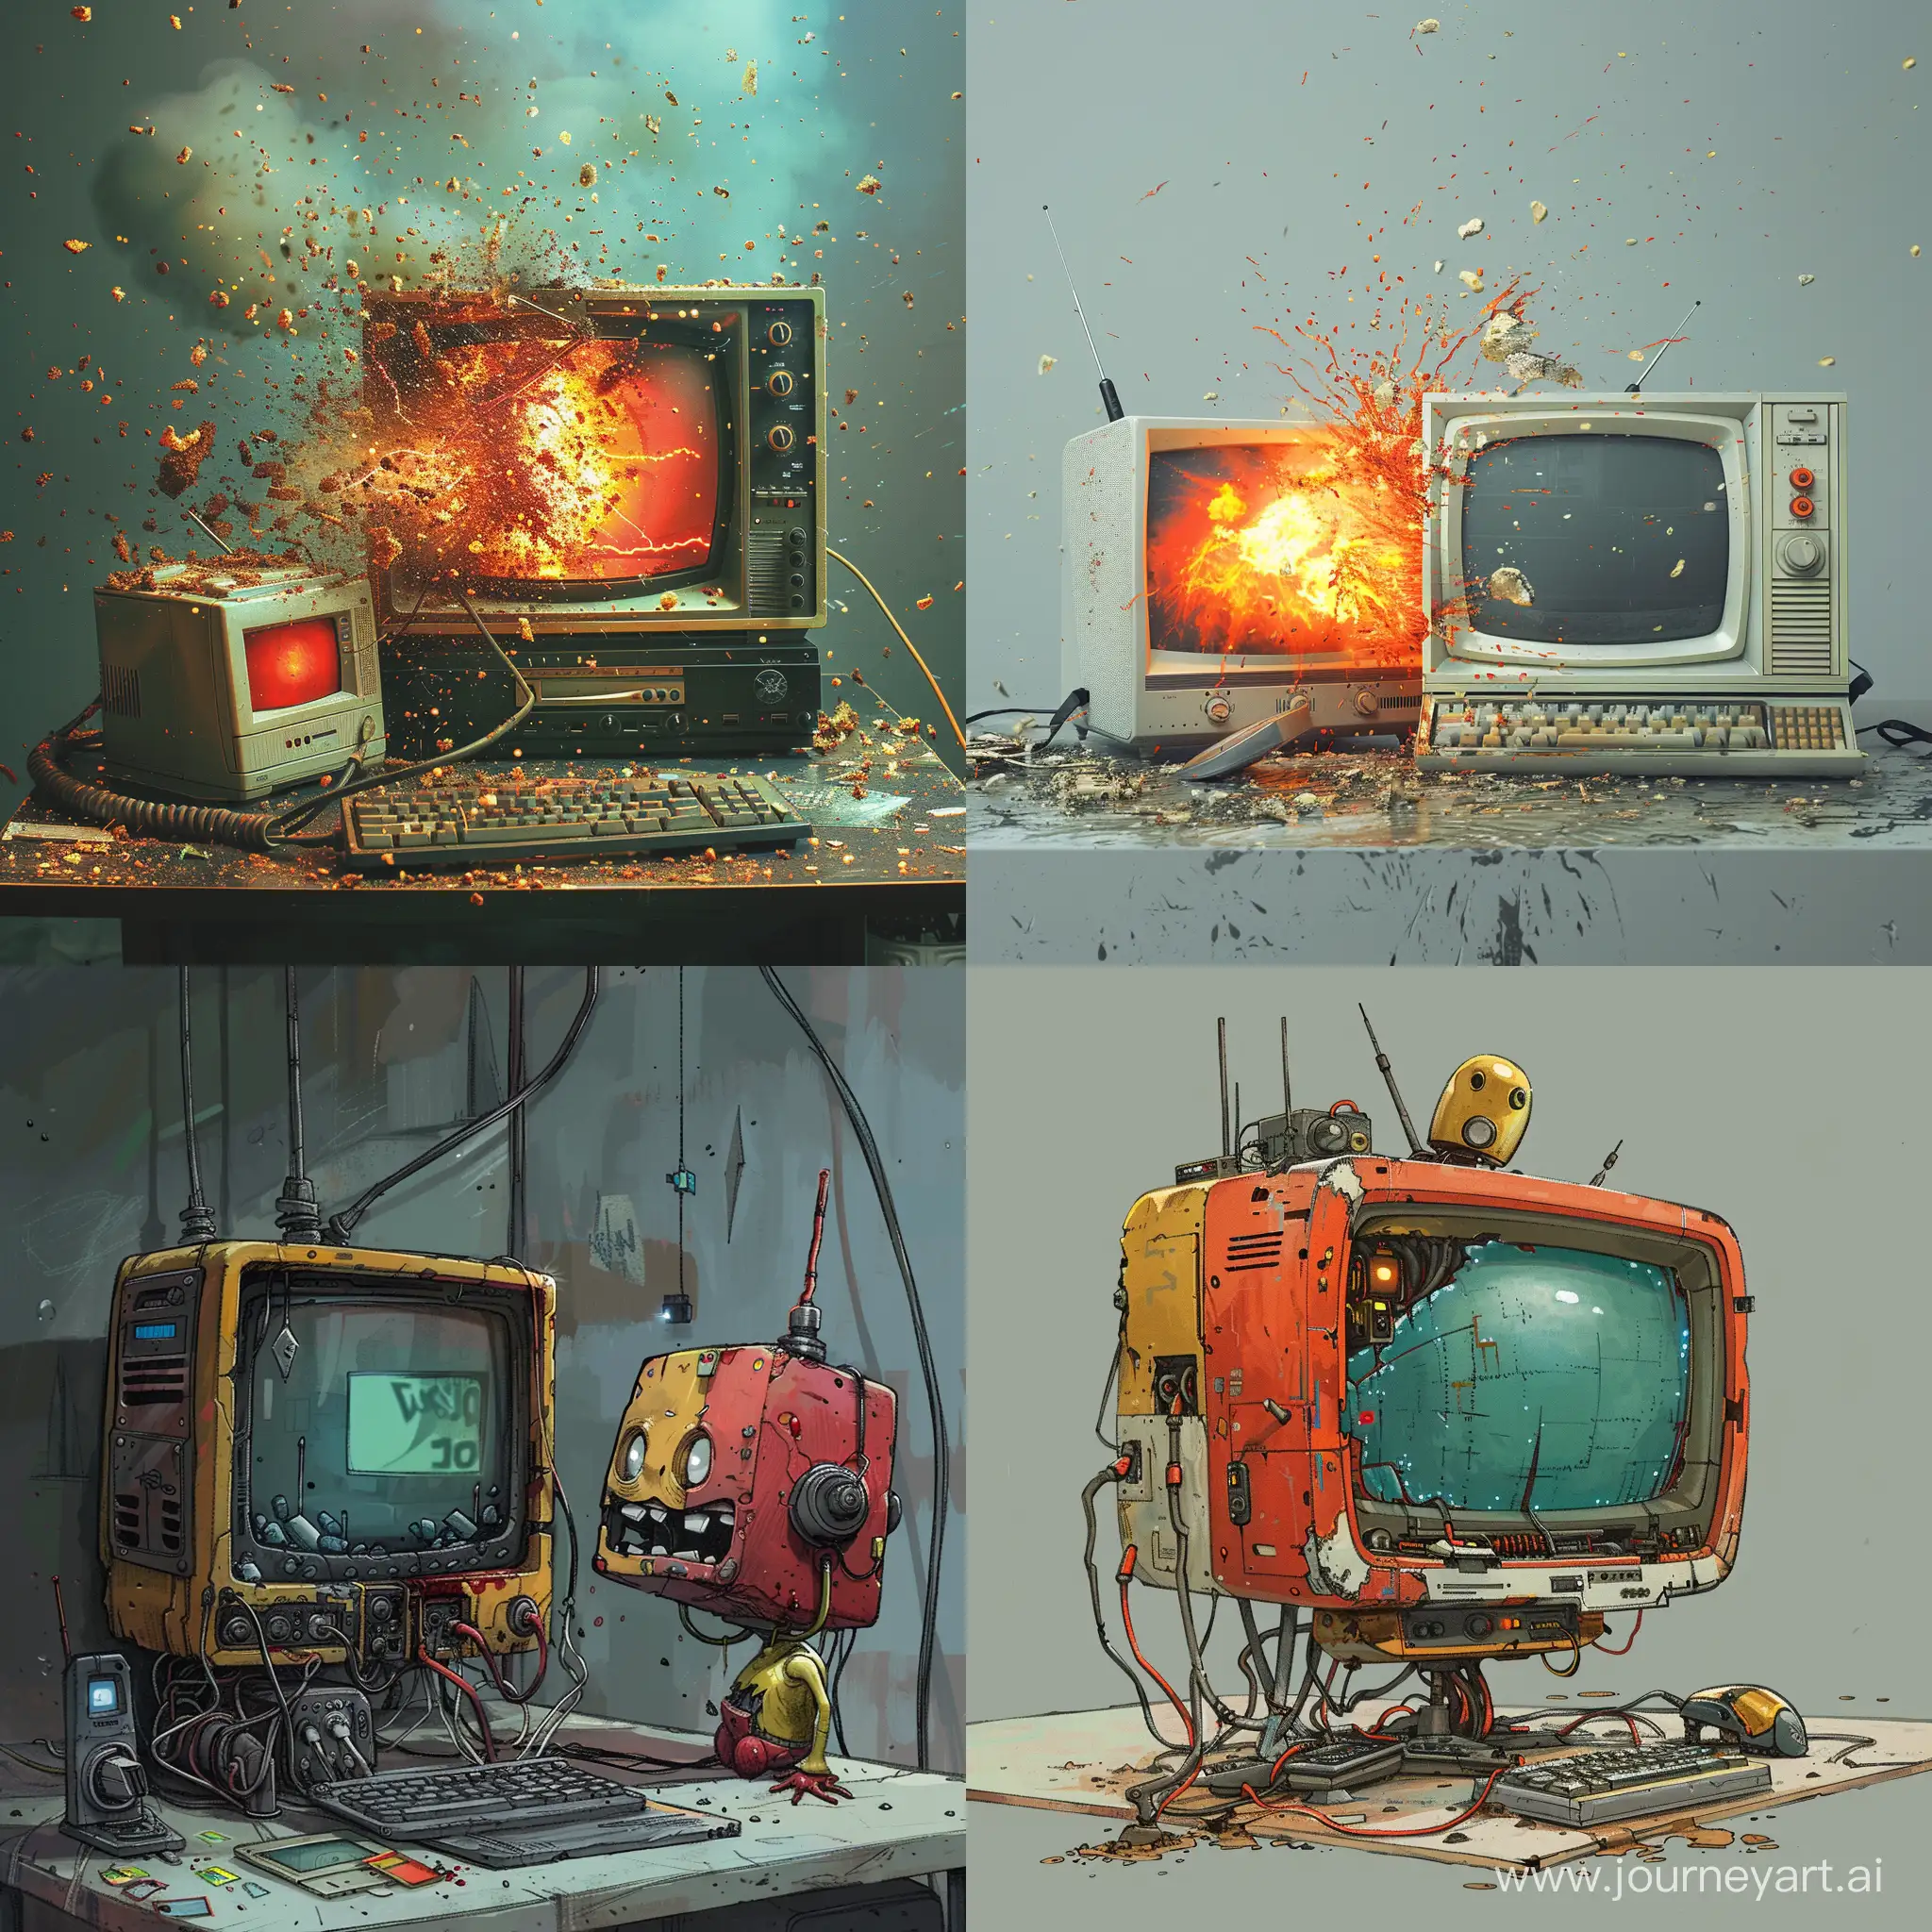 Computer-Battles-Television-in-Digital-Conflict